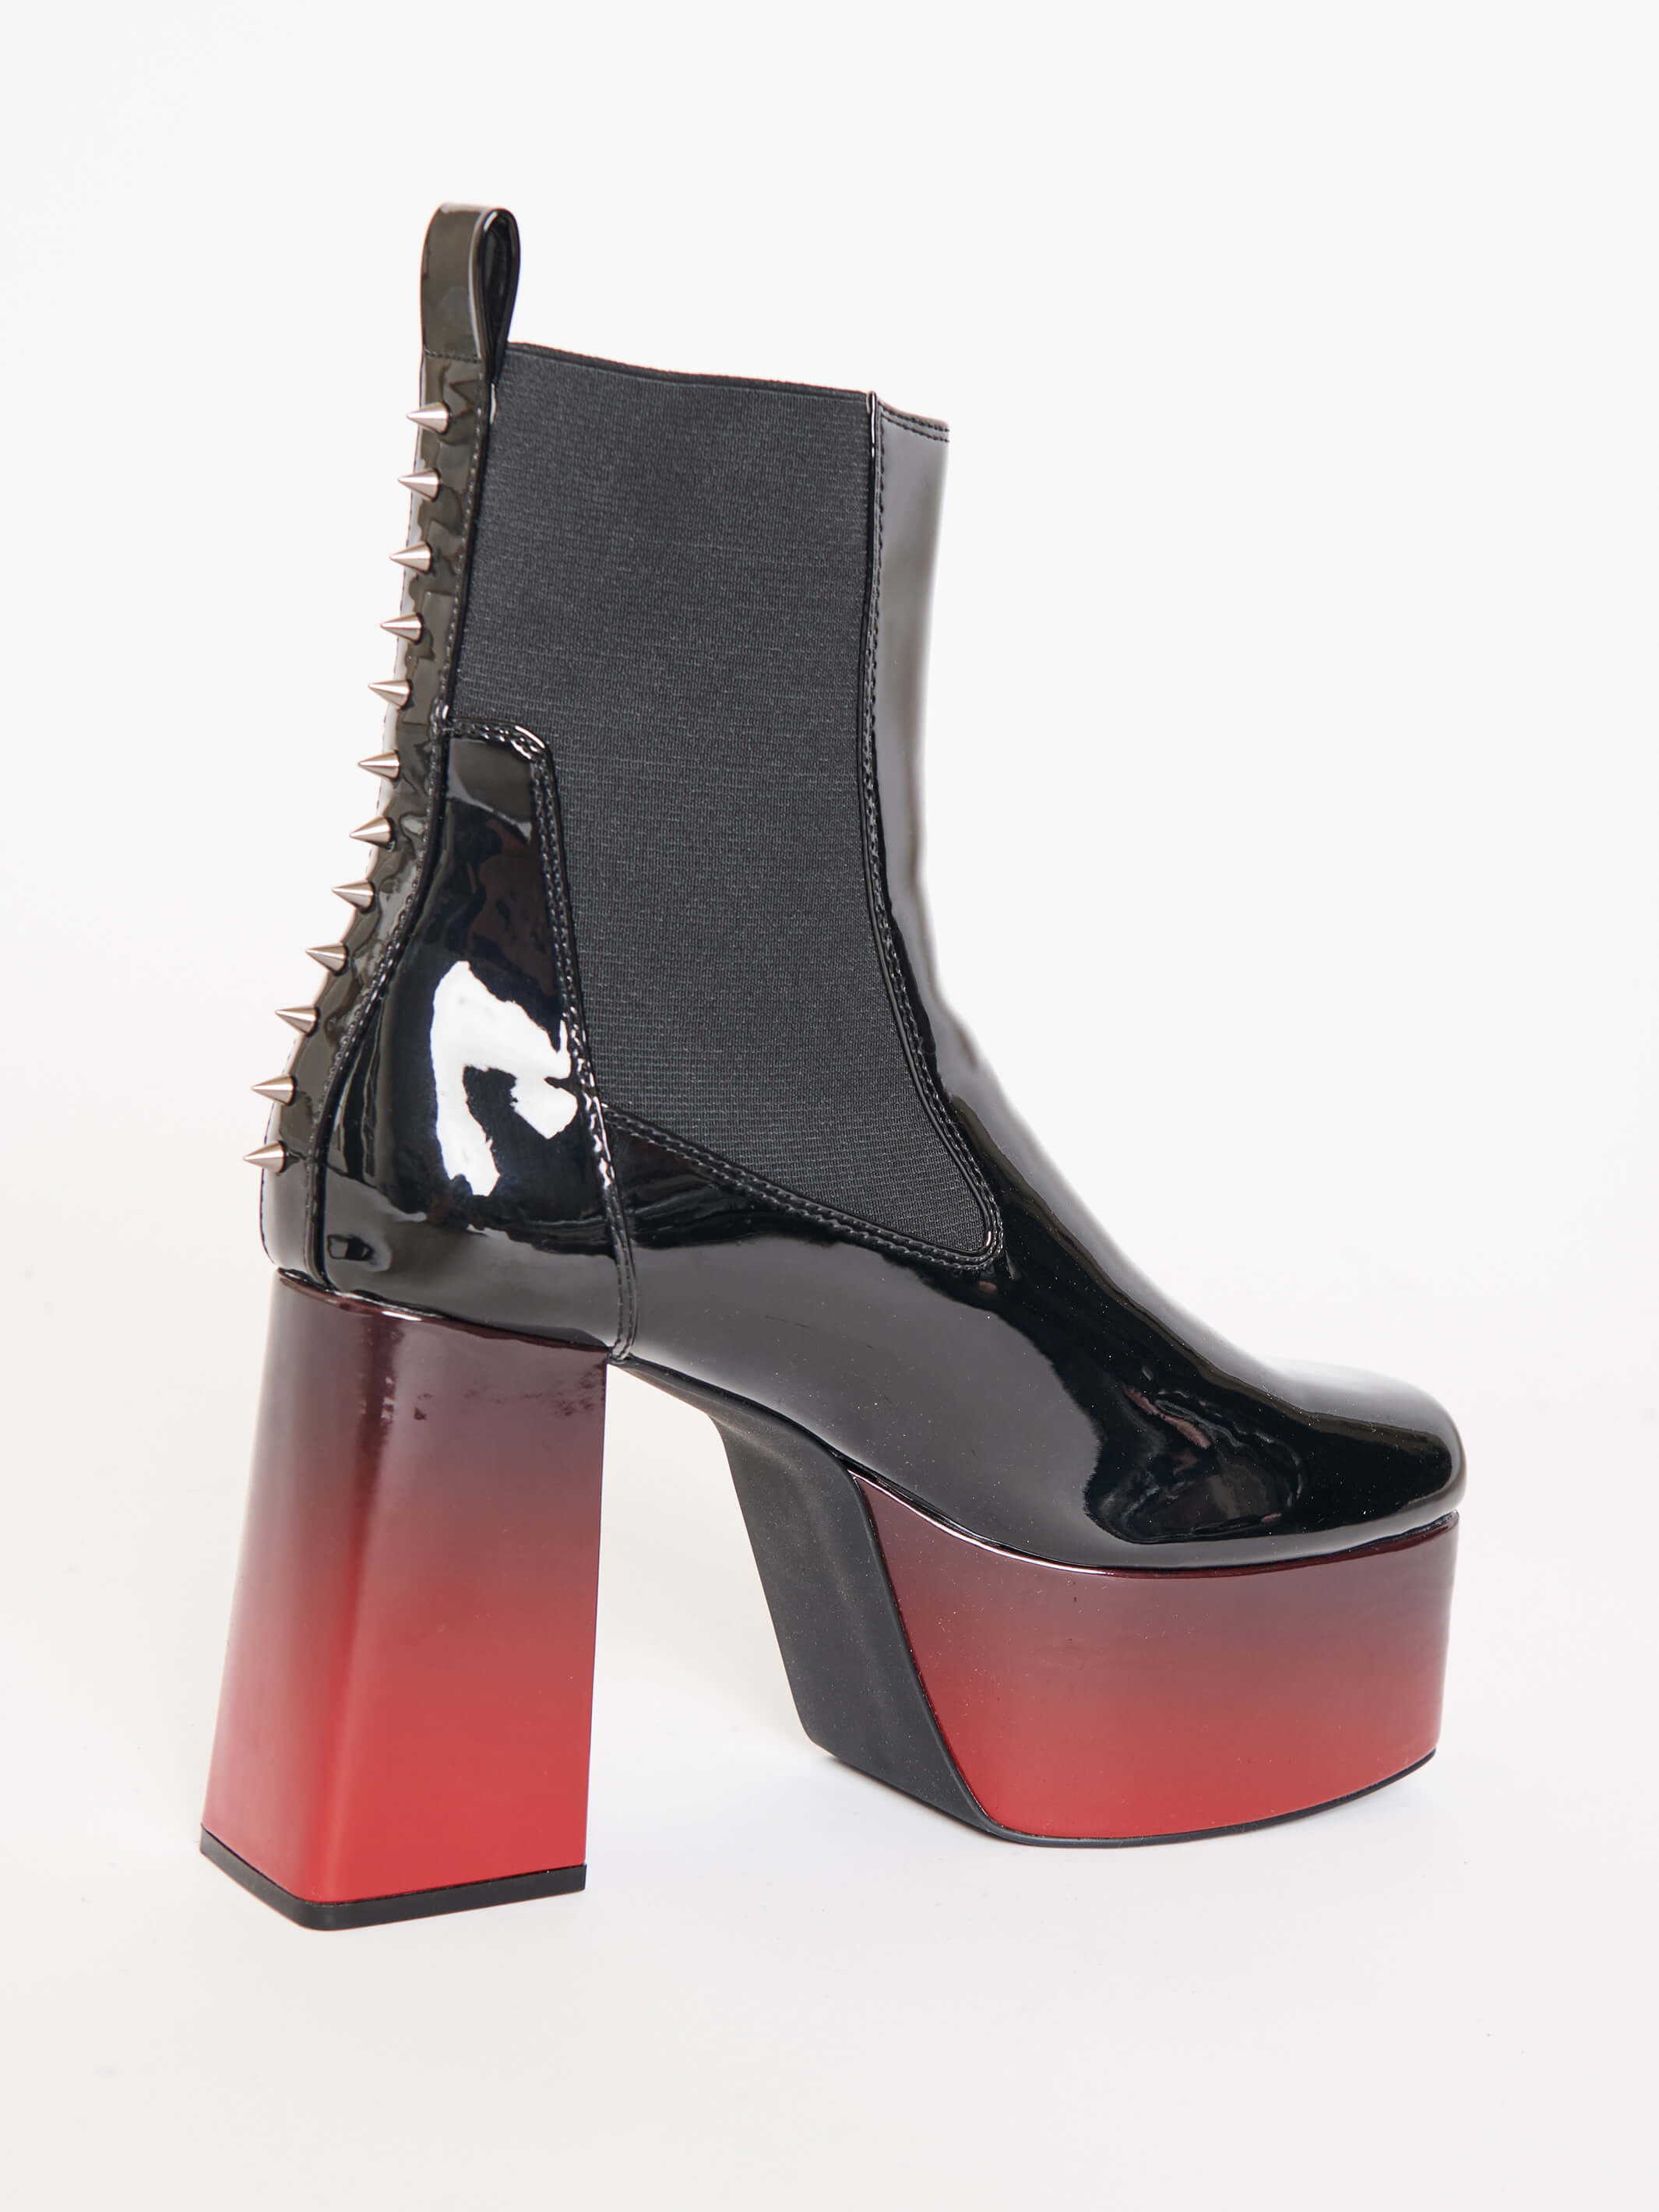 ombre red and black vegan patent leather platform boots with spikes down the back